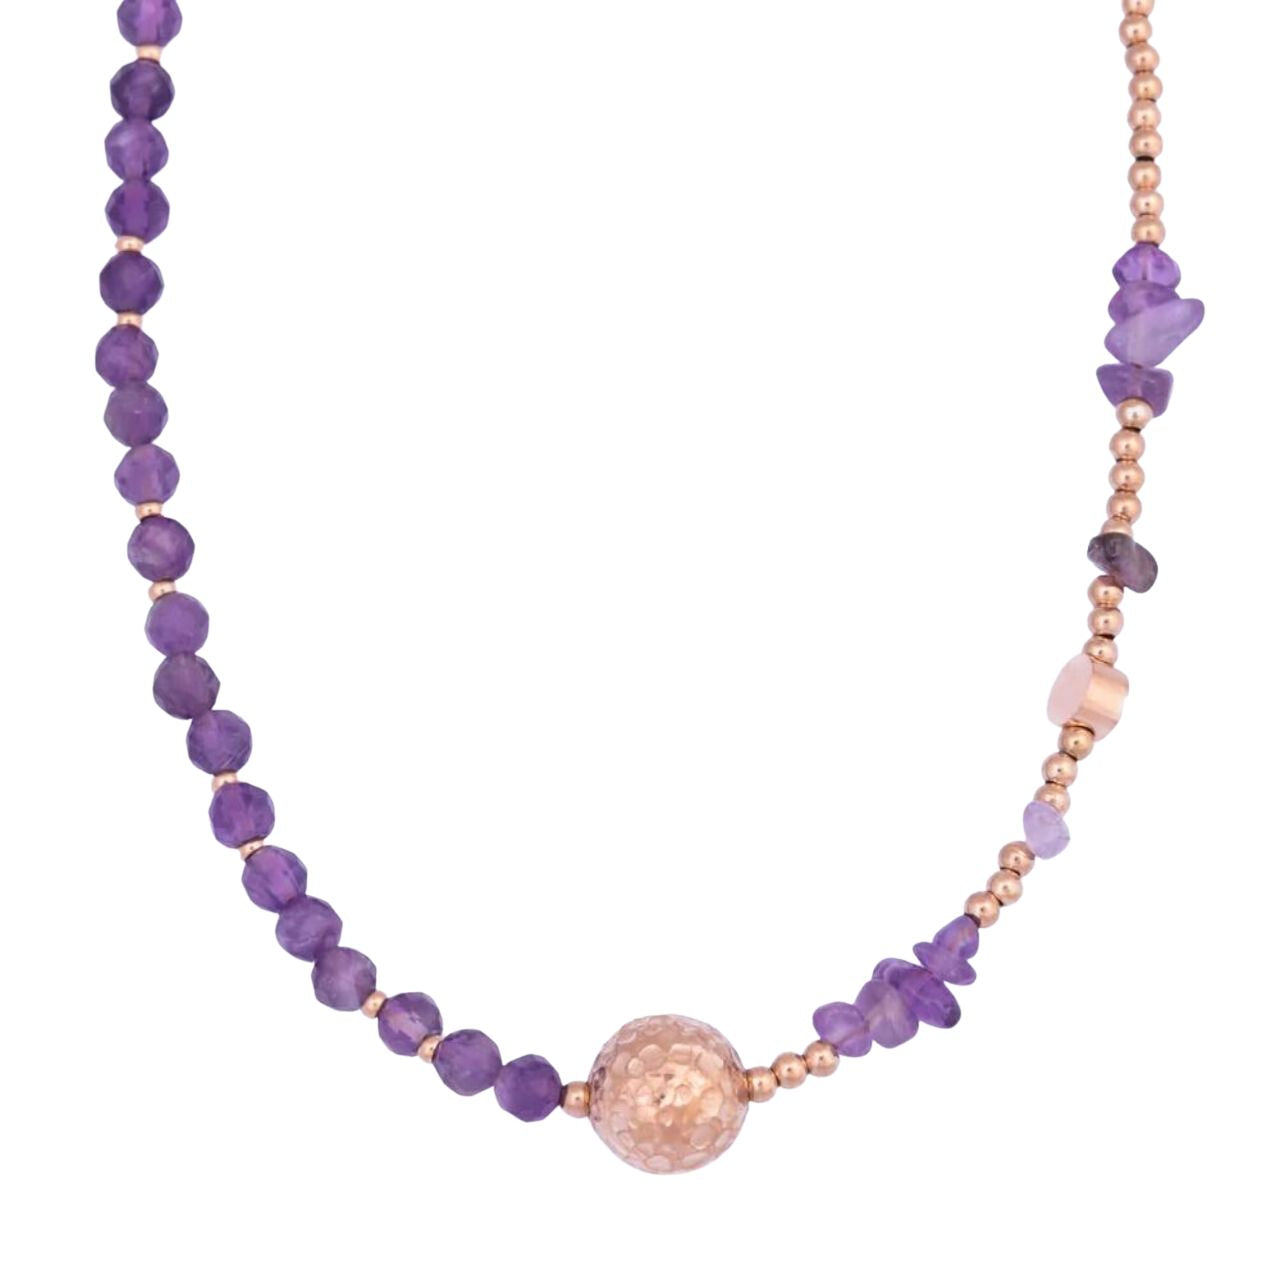 Eva Amethyst Necklace by Knight & Day  Showcase your sophisticated style with the Eva Amethyst Necklace by Knight & Day. Crafted with high-quality sterling silver and an intricate design, this necklace allows you to make a statement without being too flashy. Its alluring amethyst gemstone is sure to captivate onlookers.